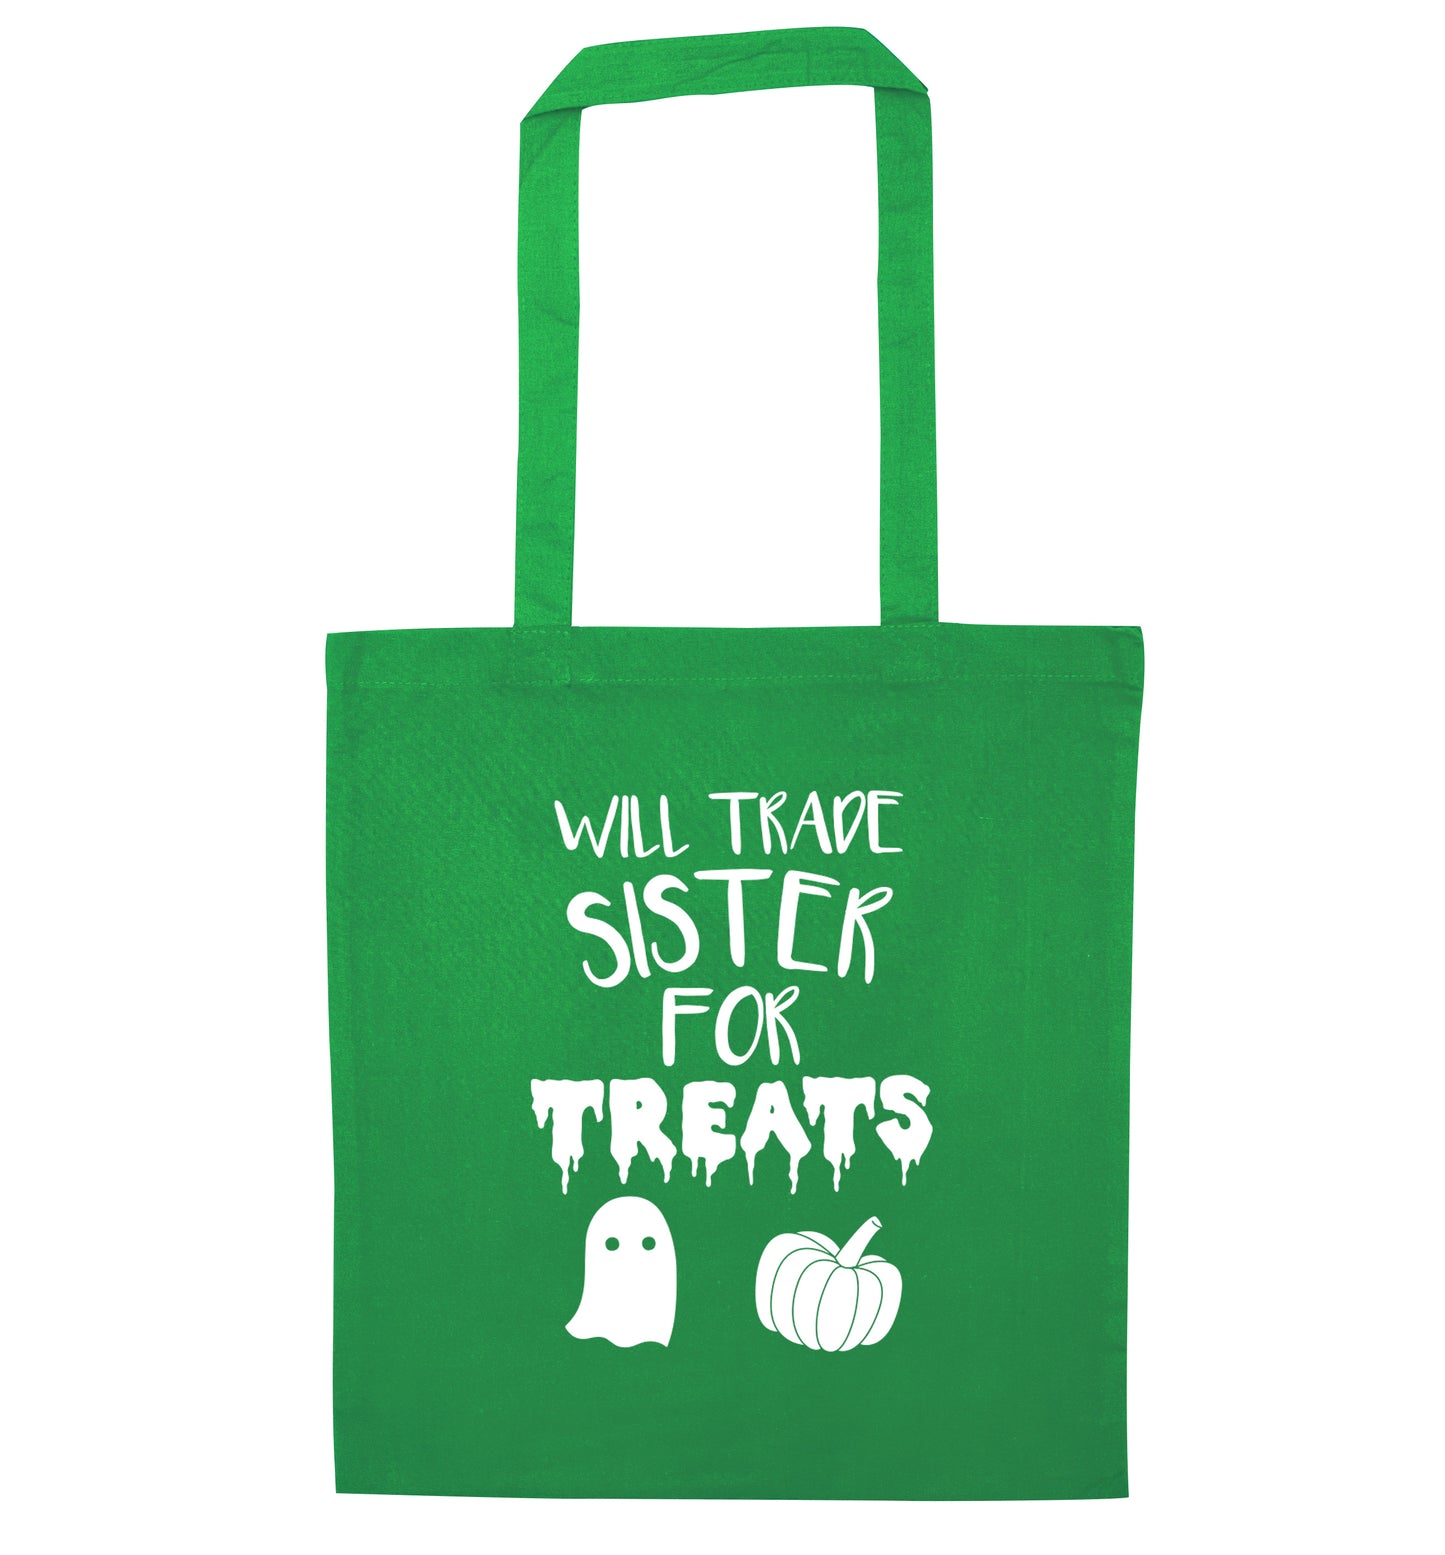 Will trade sister for sweets green tote bag